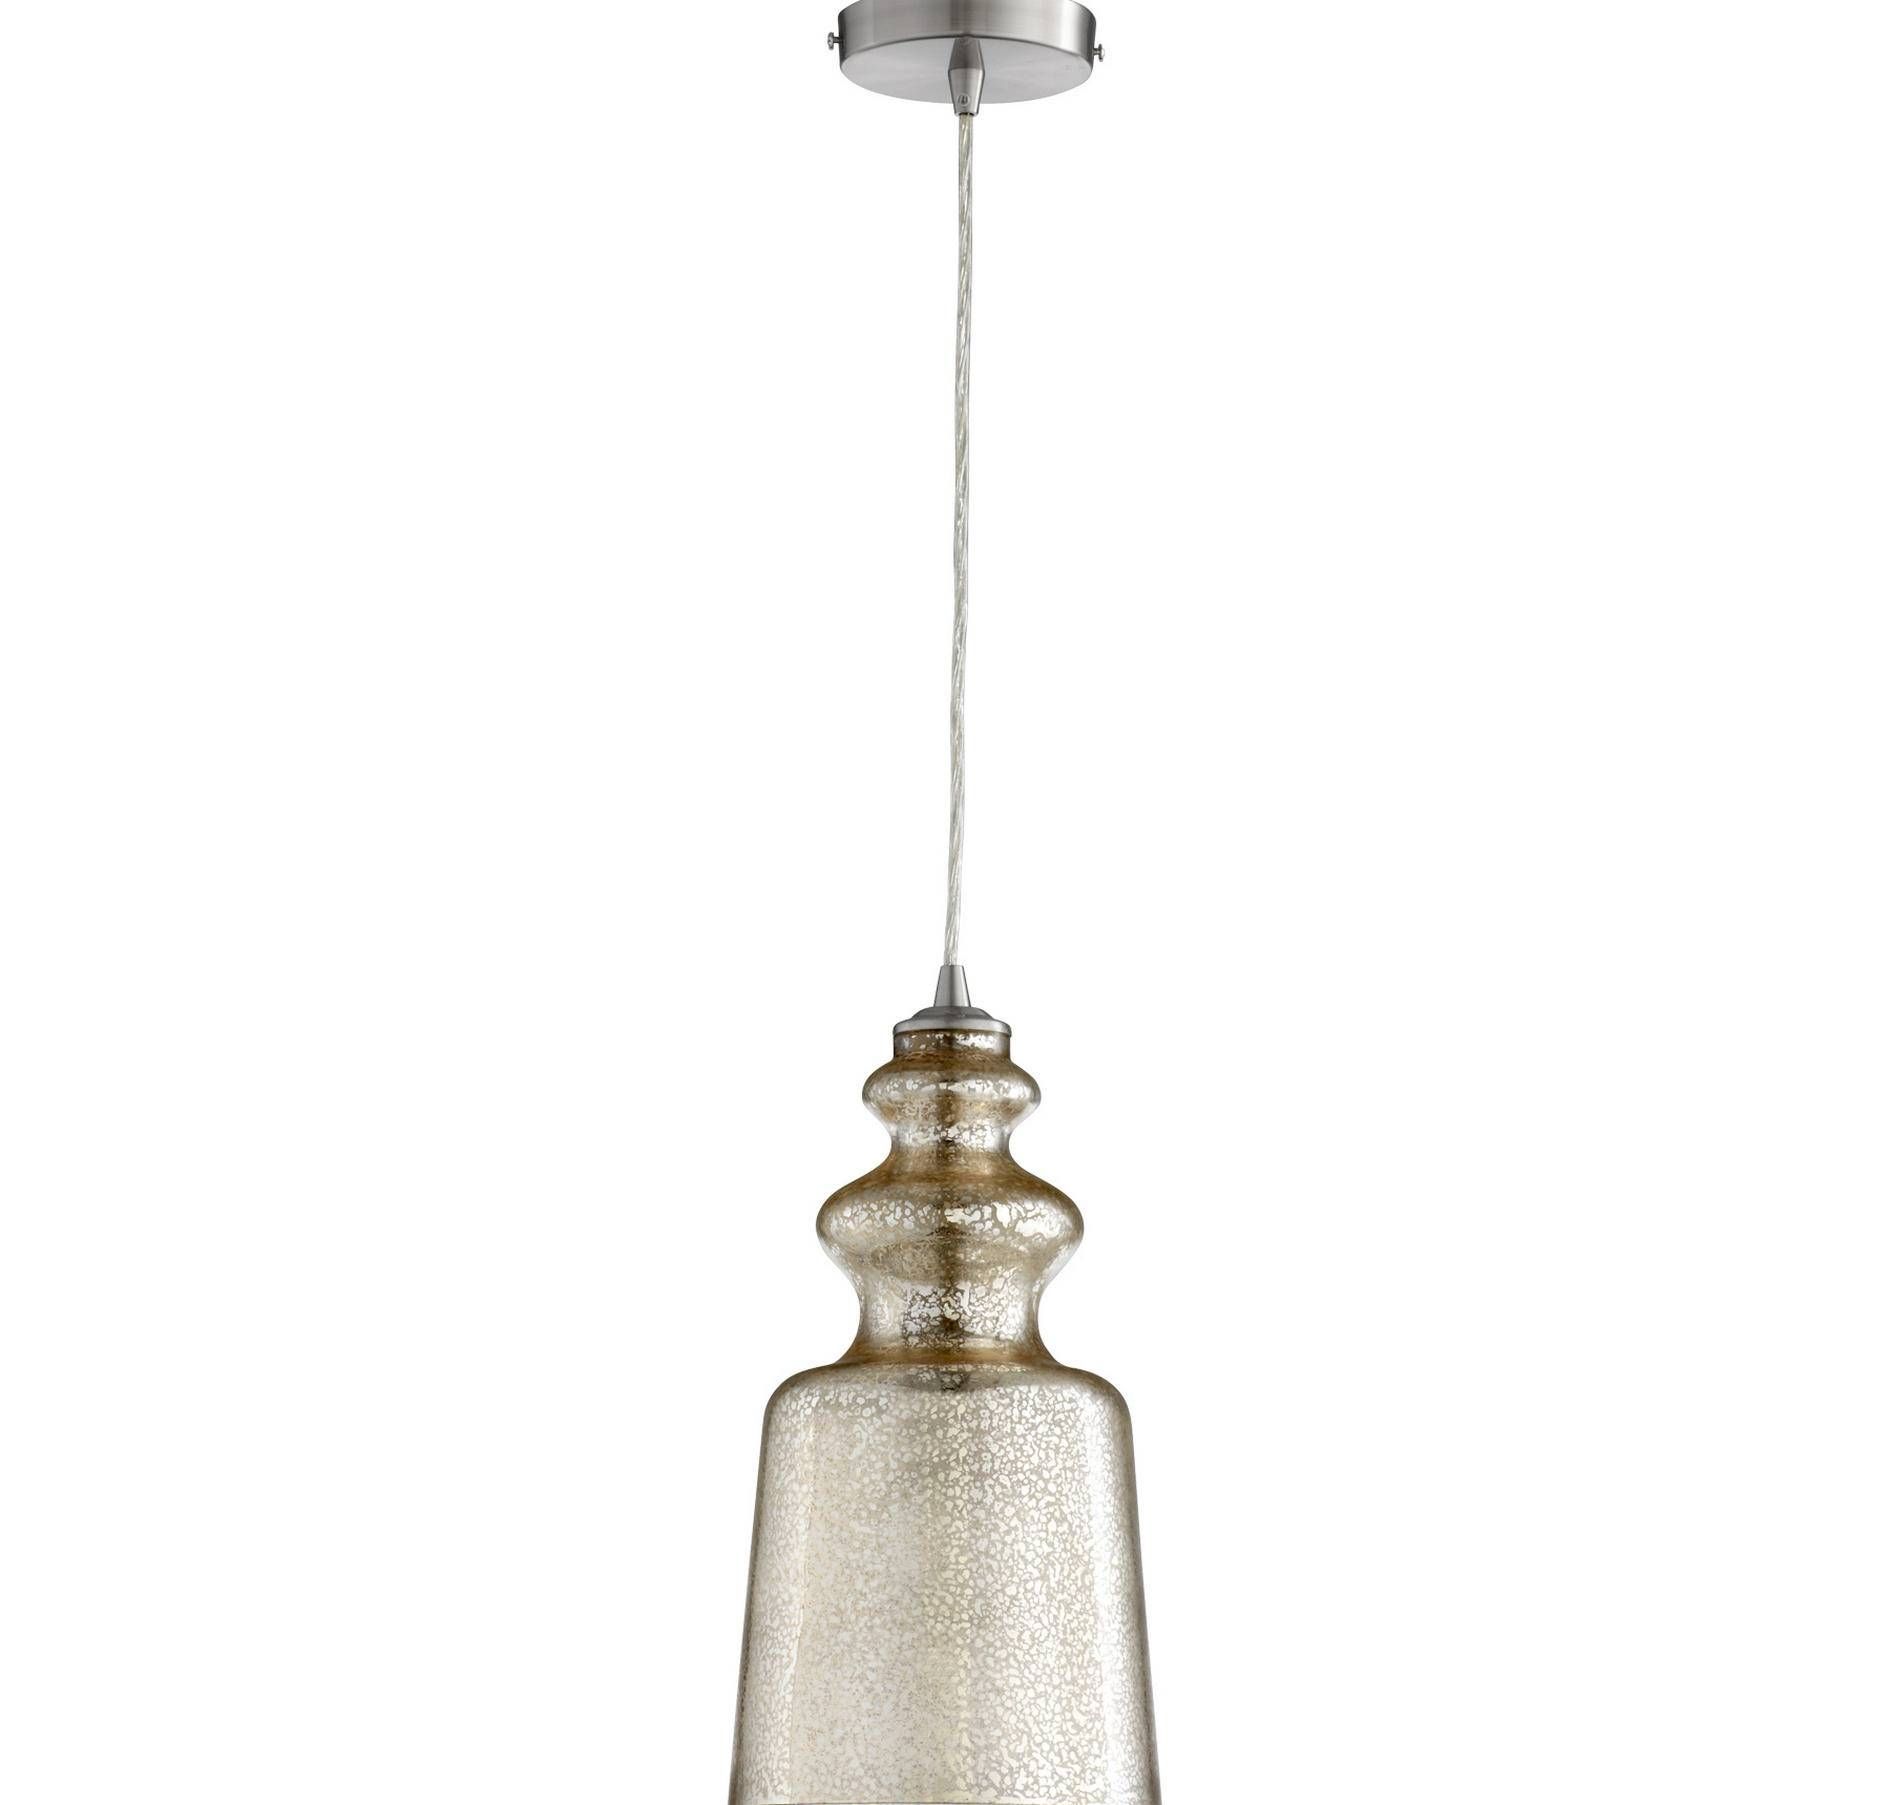 Chandelier: Lighting Fixtures That Blend Timeless Beauty With Inside Mercury Glass Lighting Fixtures (View 10 of 15)